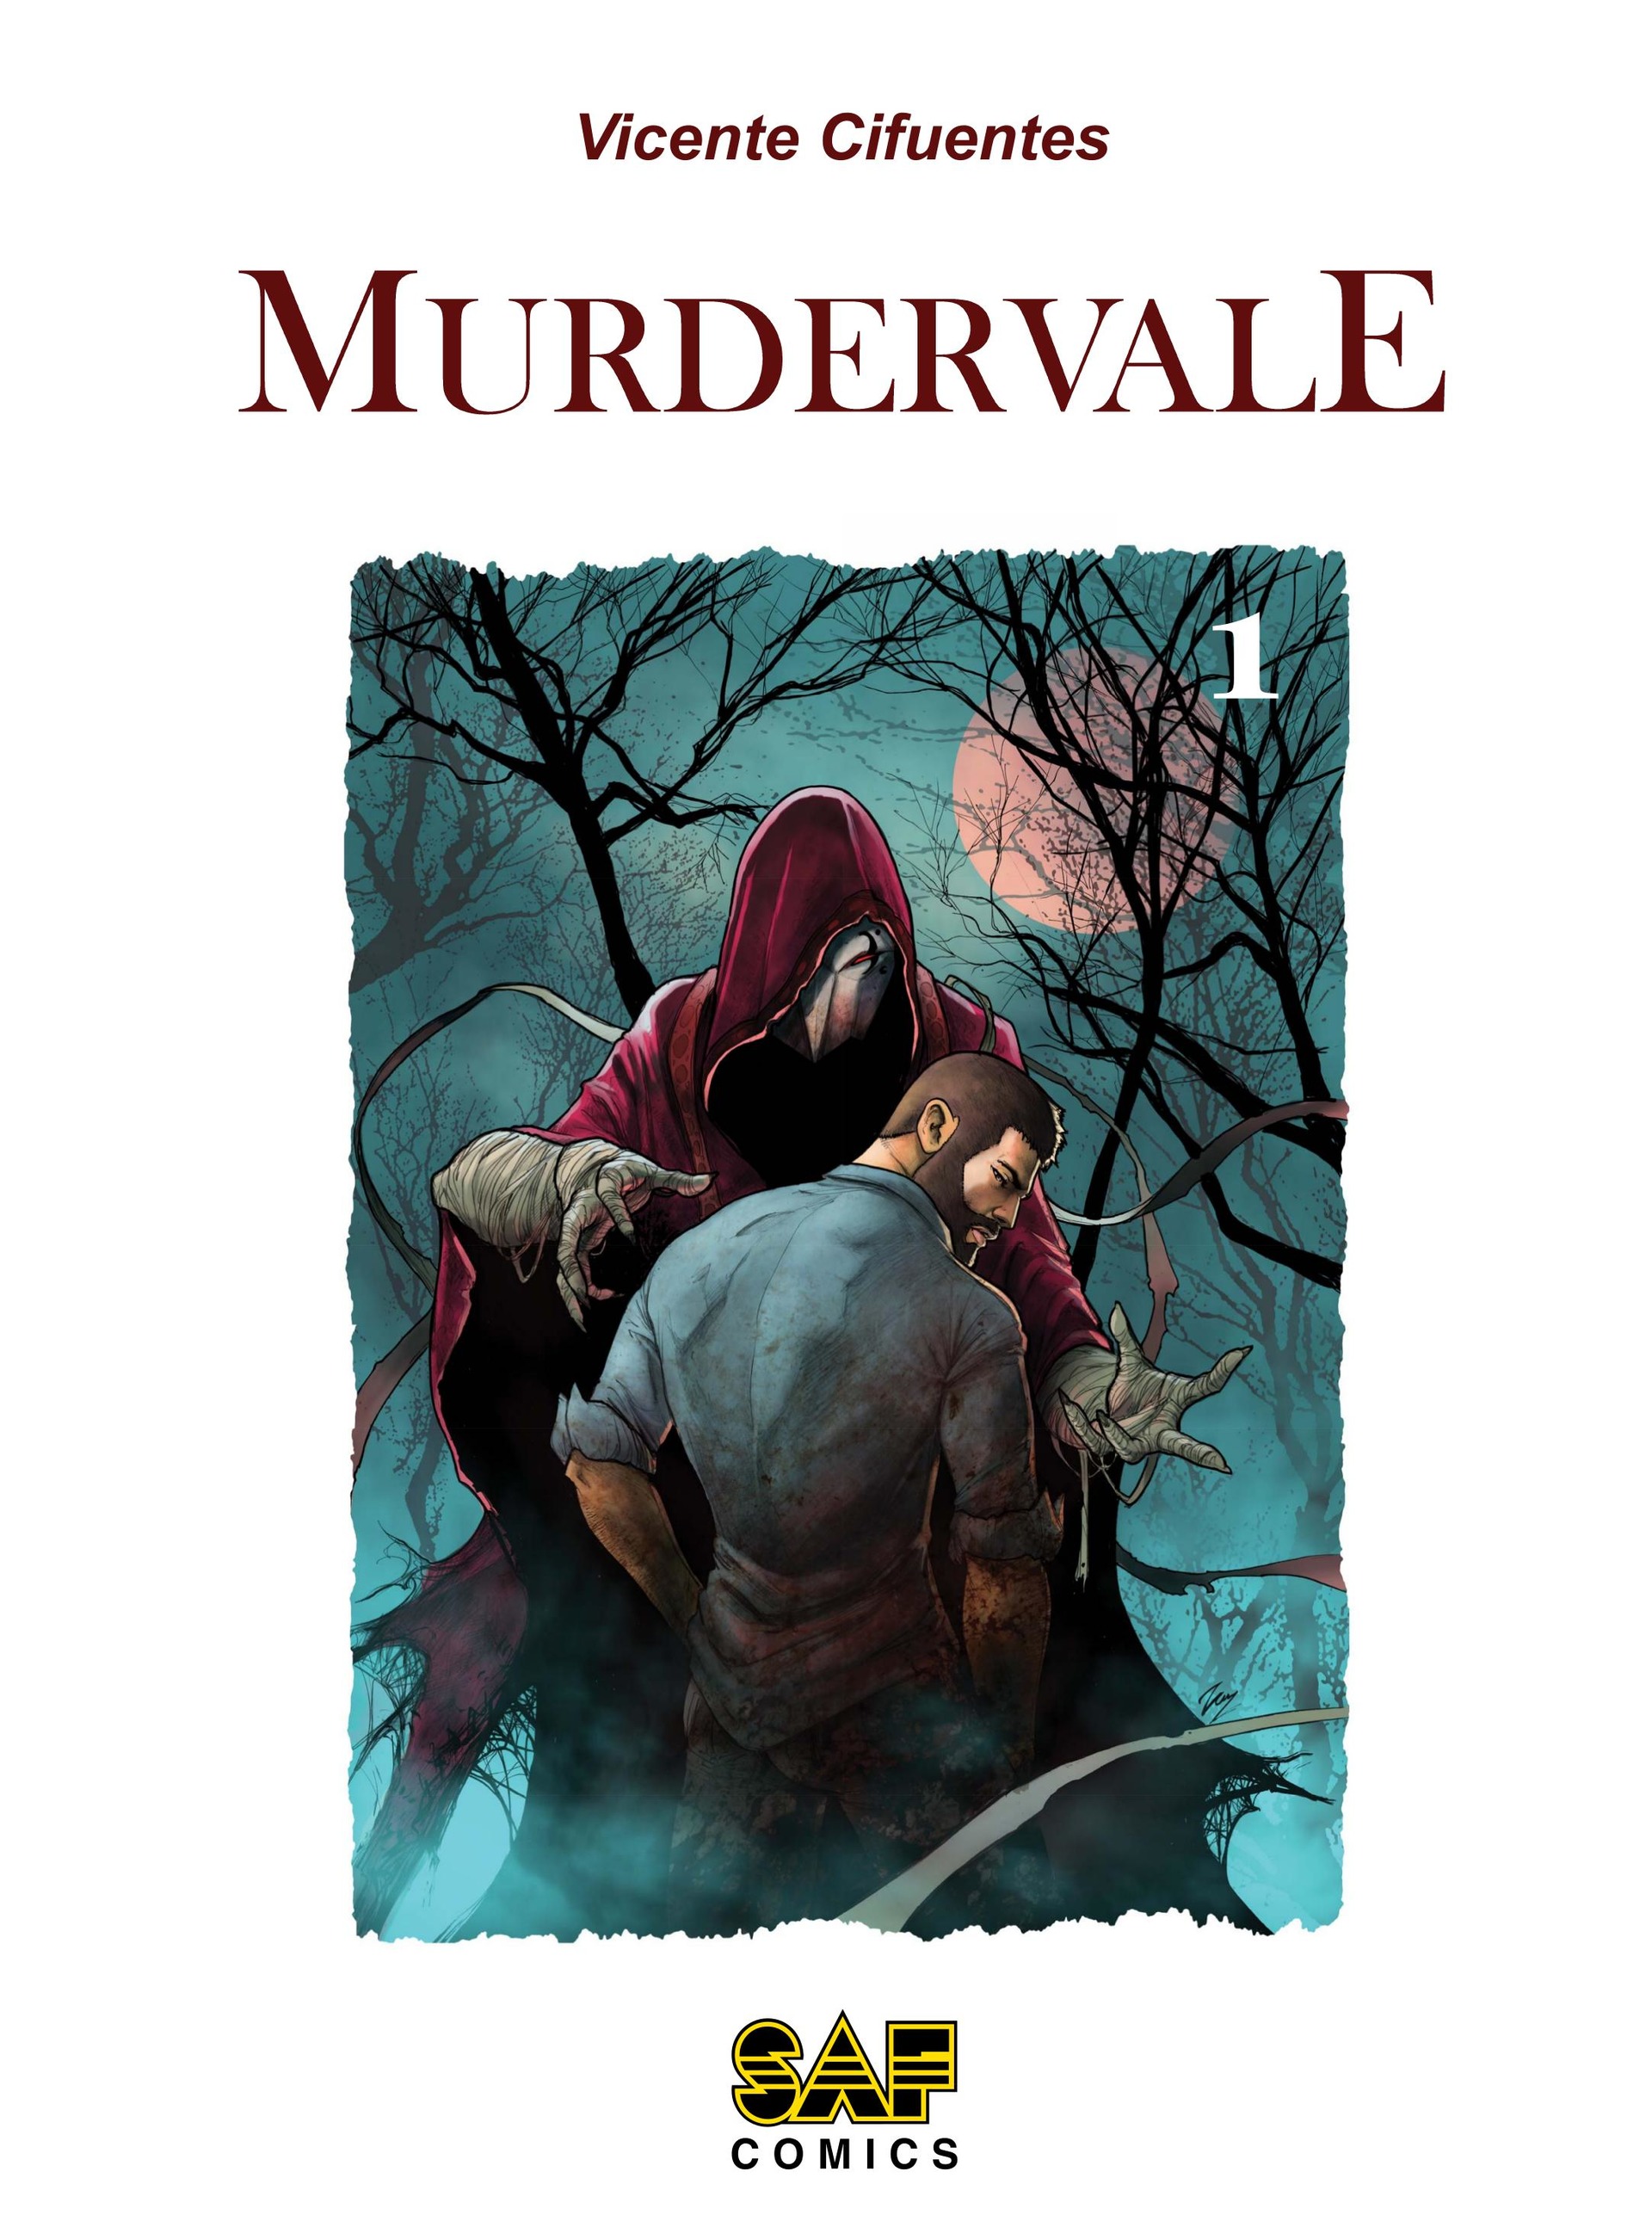 Read online Murdervale comic -  Issue #1 - 2